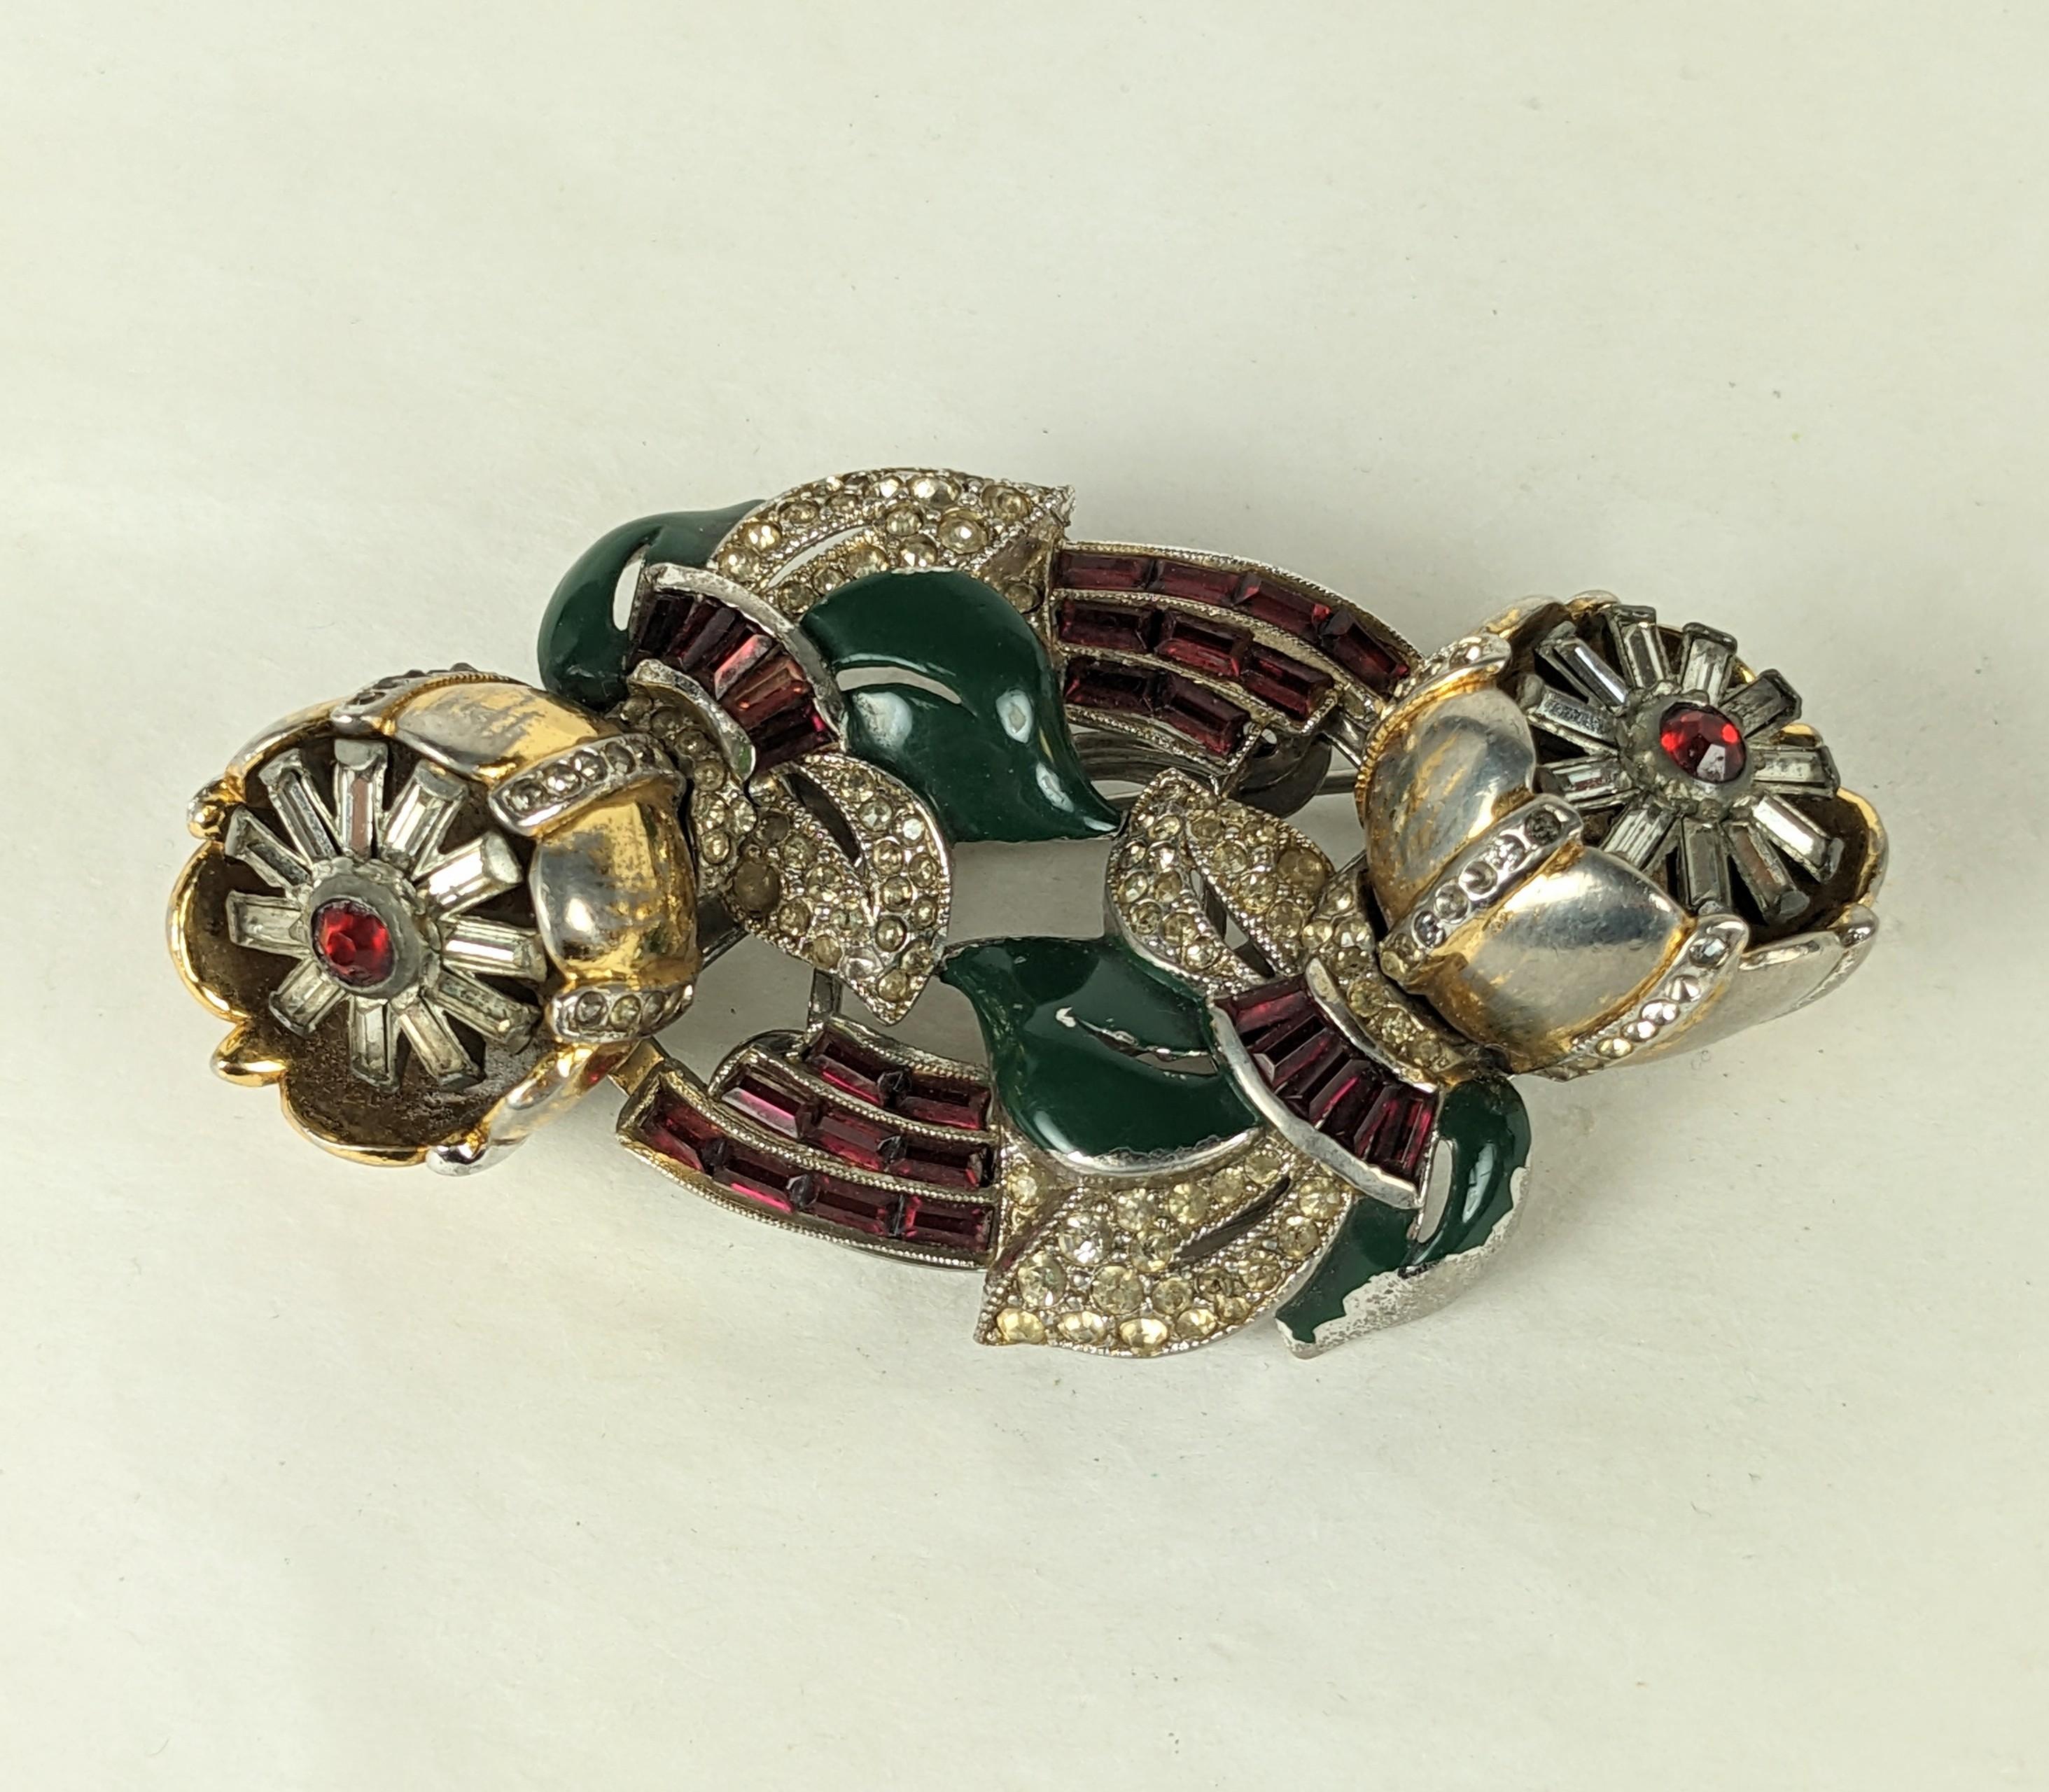 Coro classic flower twist tremblant duette brooch of gilt metal, green enamel, ruby crystal baguettes and crystal pastes. Both flower clips separate off base to be worn separately. 1940's USA. 
Length  3